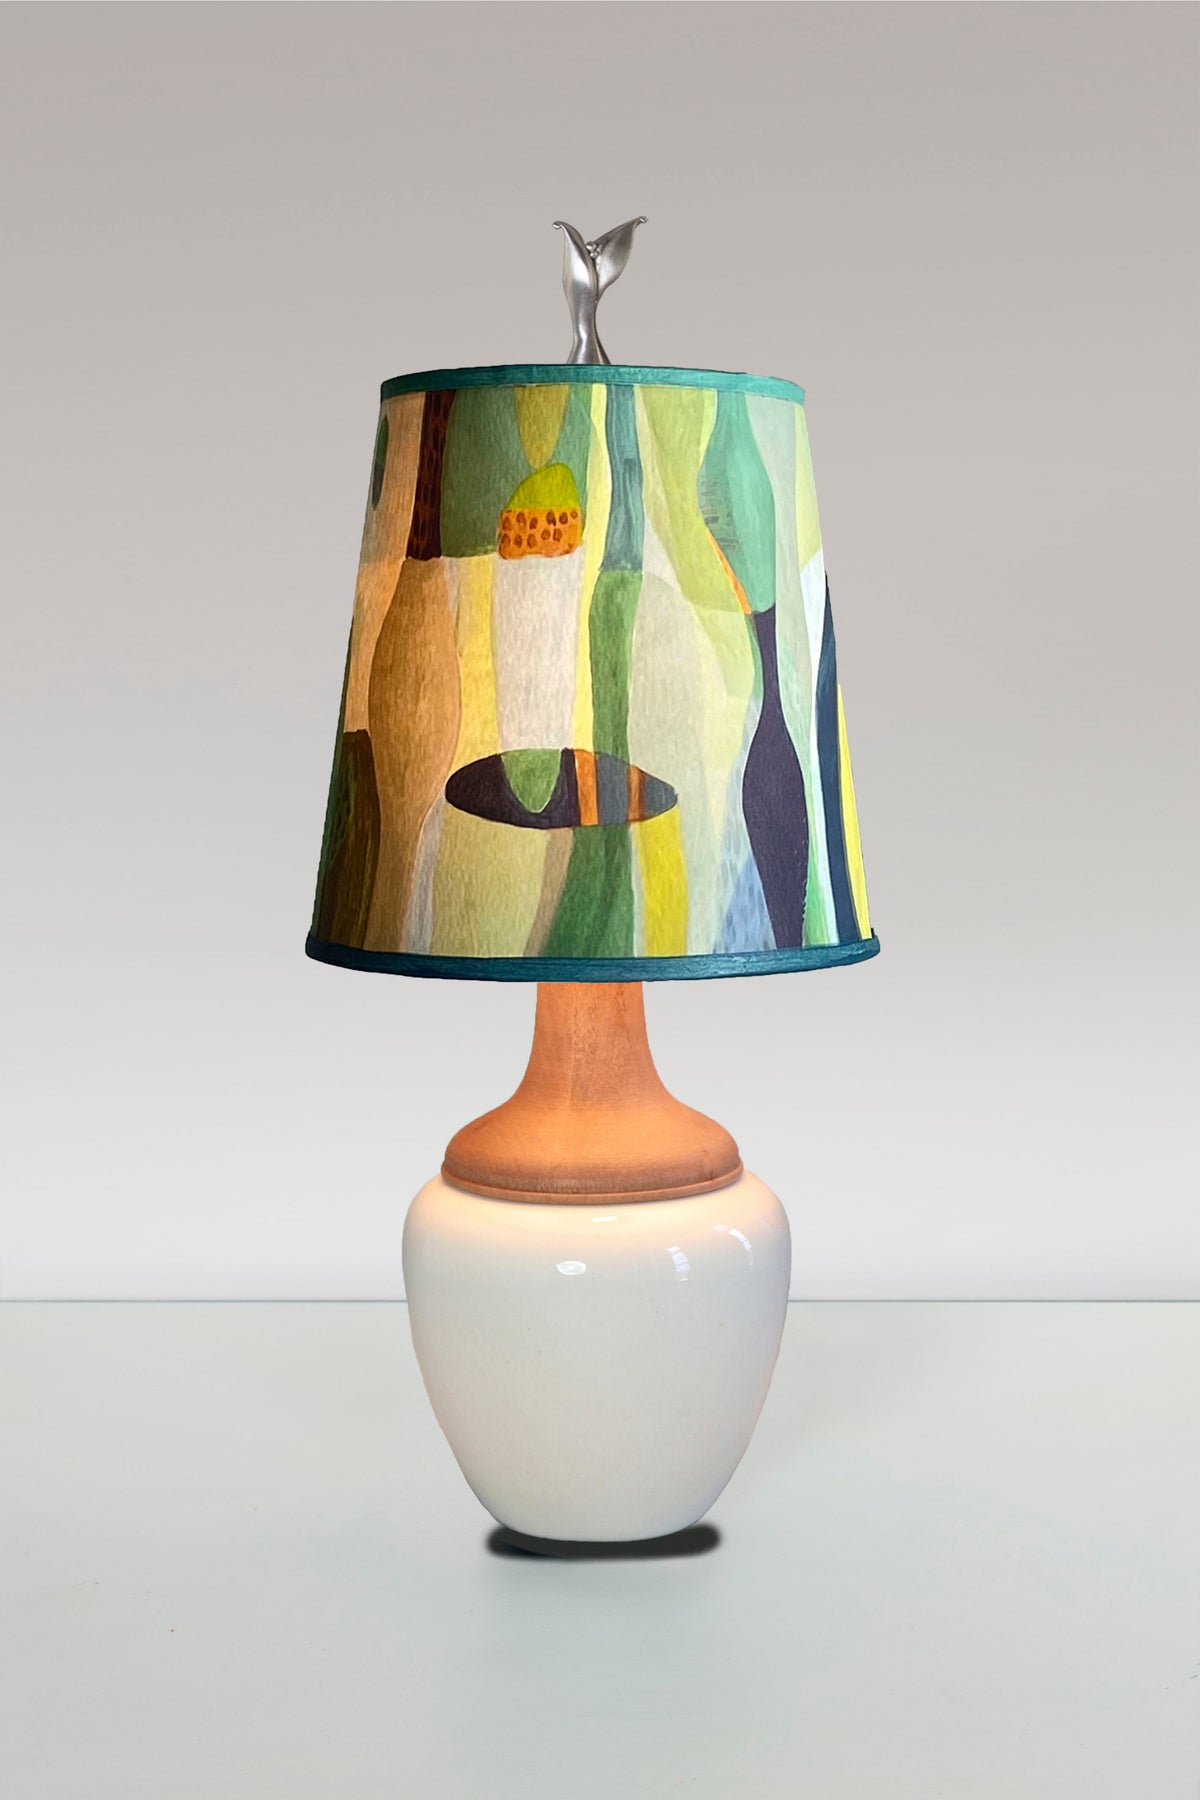 Janna Ugone &amp; Co Table Lamp Ceramic and Maple Table Lamp in Ivory Gloss with Small Drum Shade in Riviera in Citrus